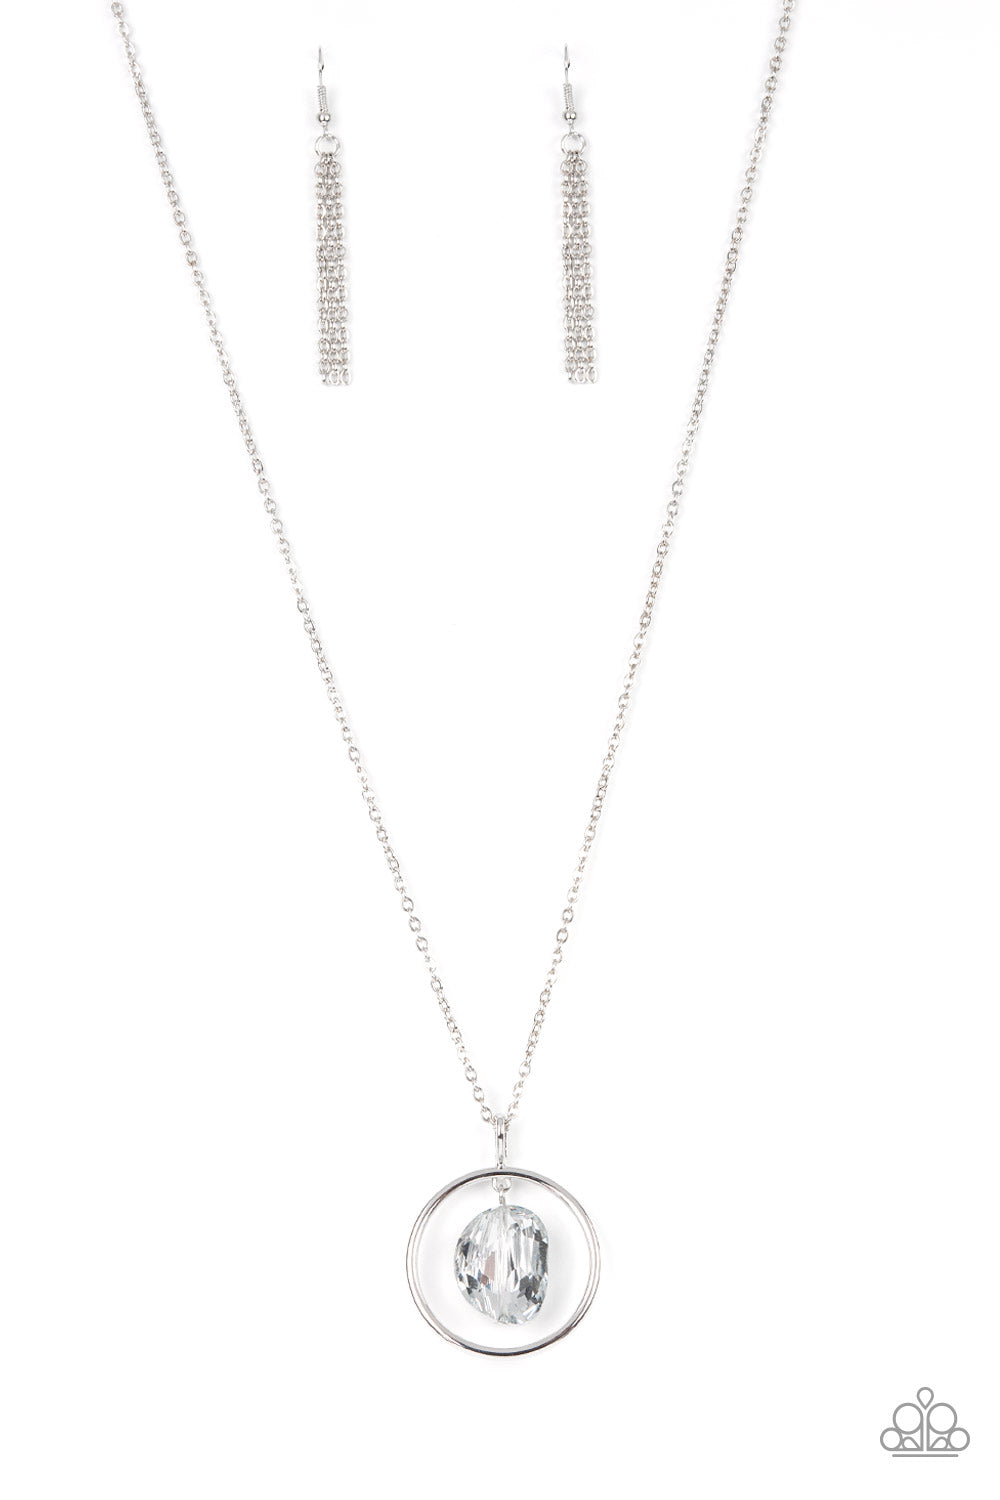 Paparazzi - Hands-Down Dazzling - Silver Necklace